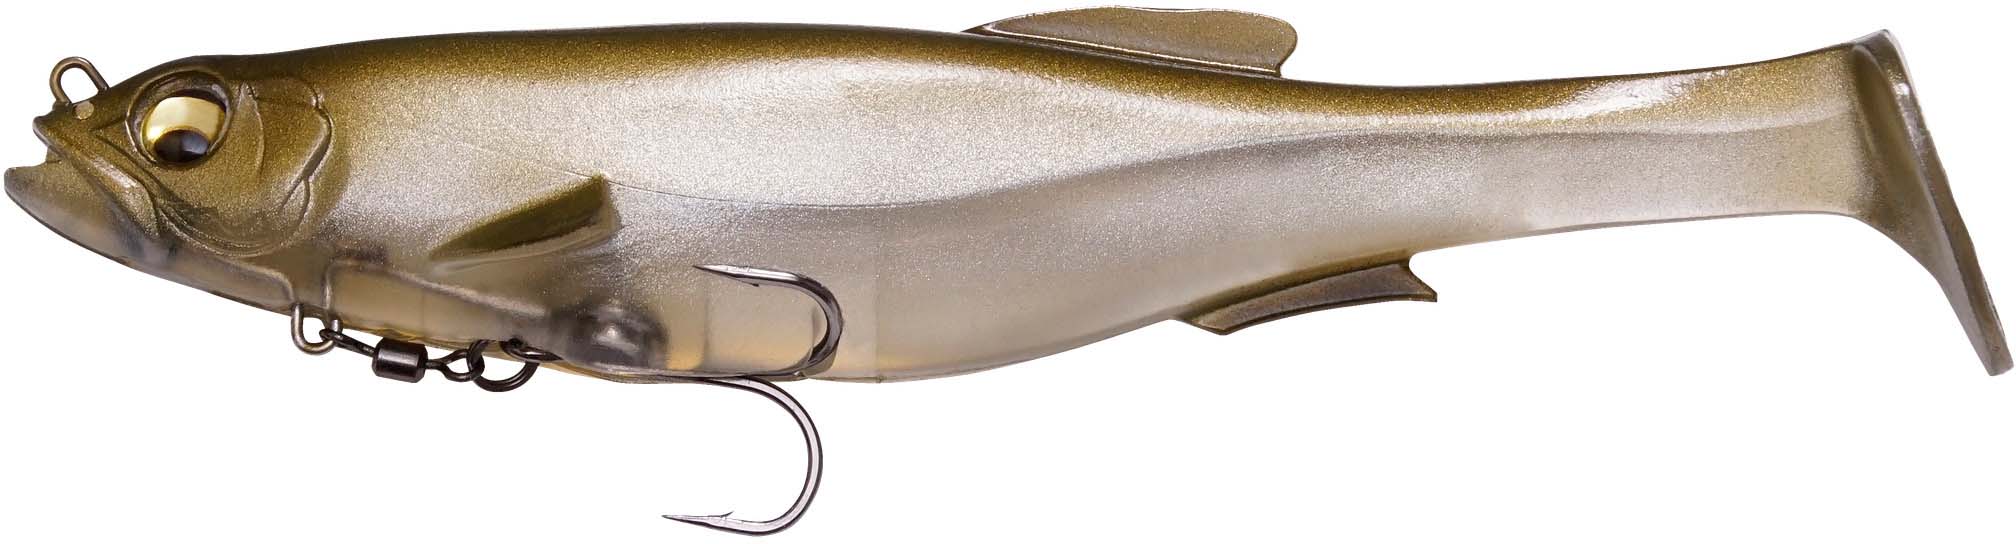 Magdraft Season Is Here!… Tips And Advice To Maximize The Lures